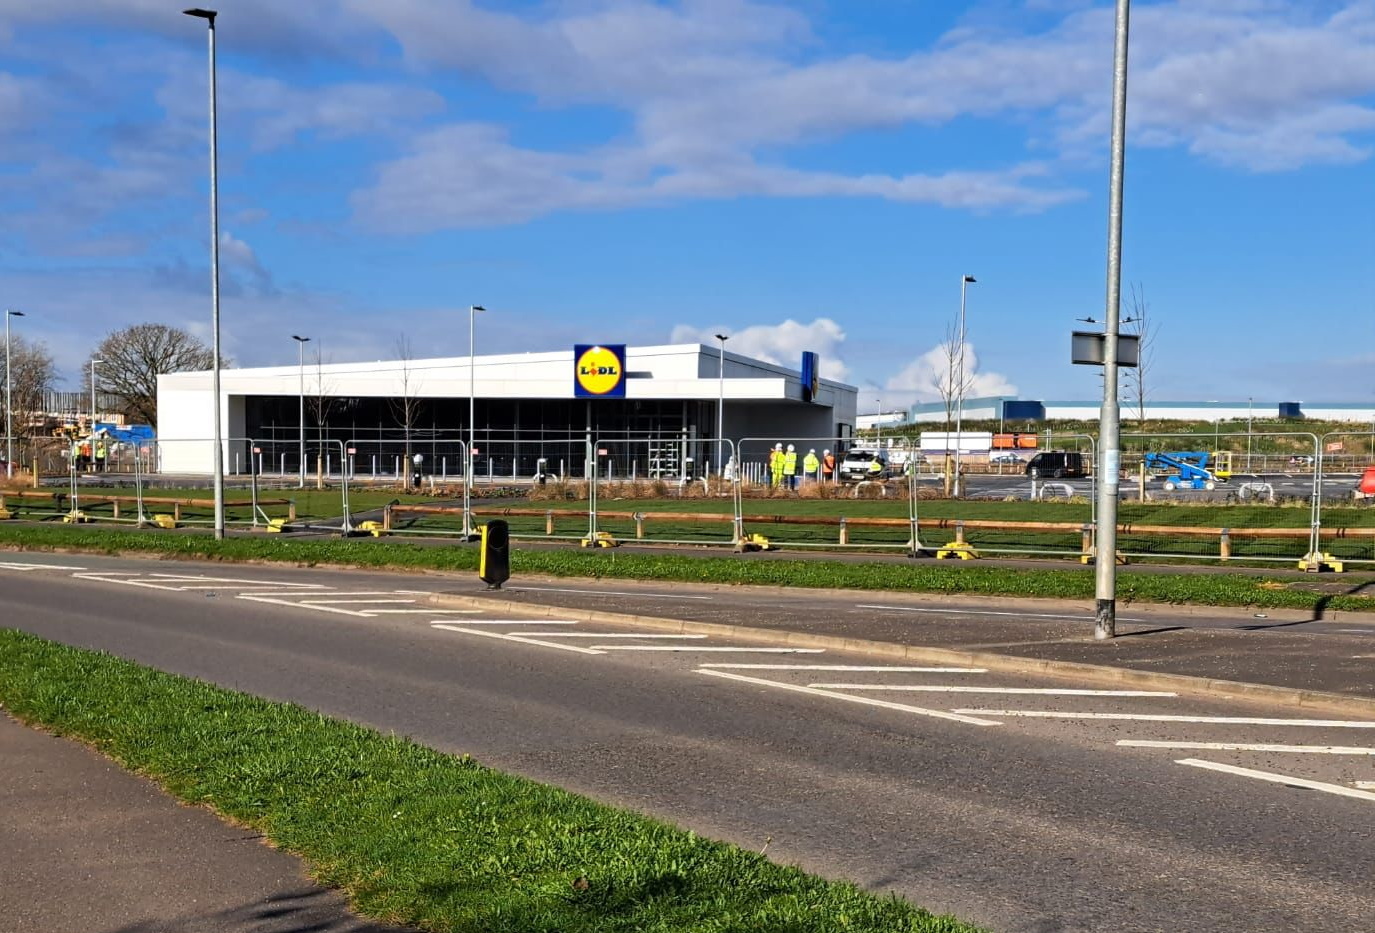 Photos of new Omega retail park which will open within days